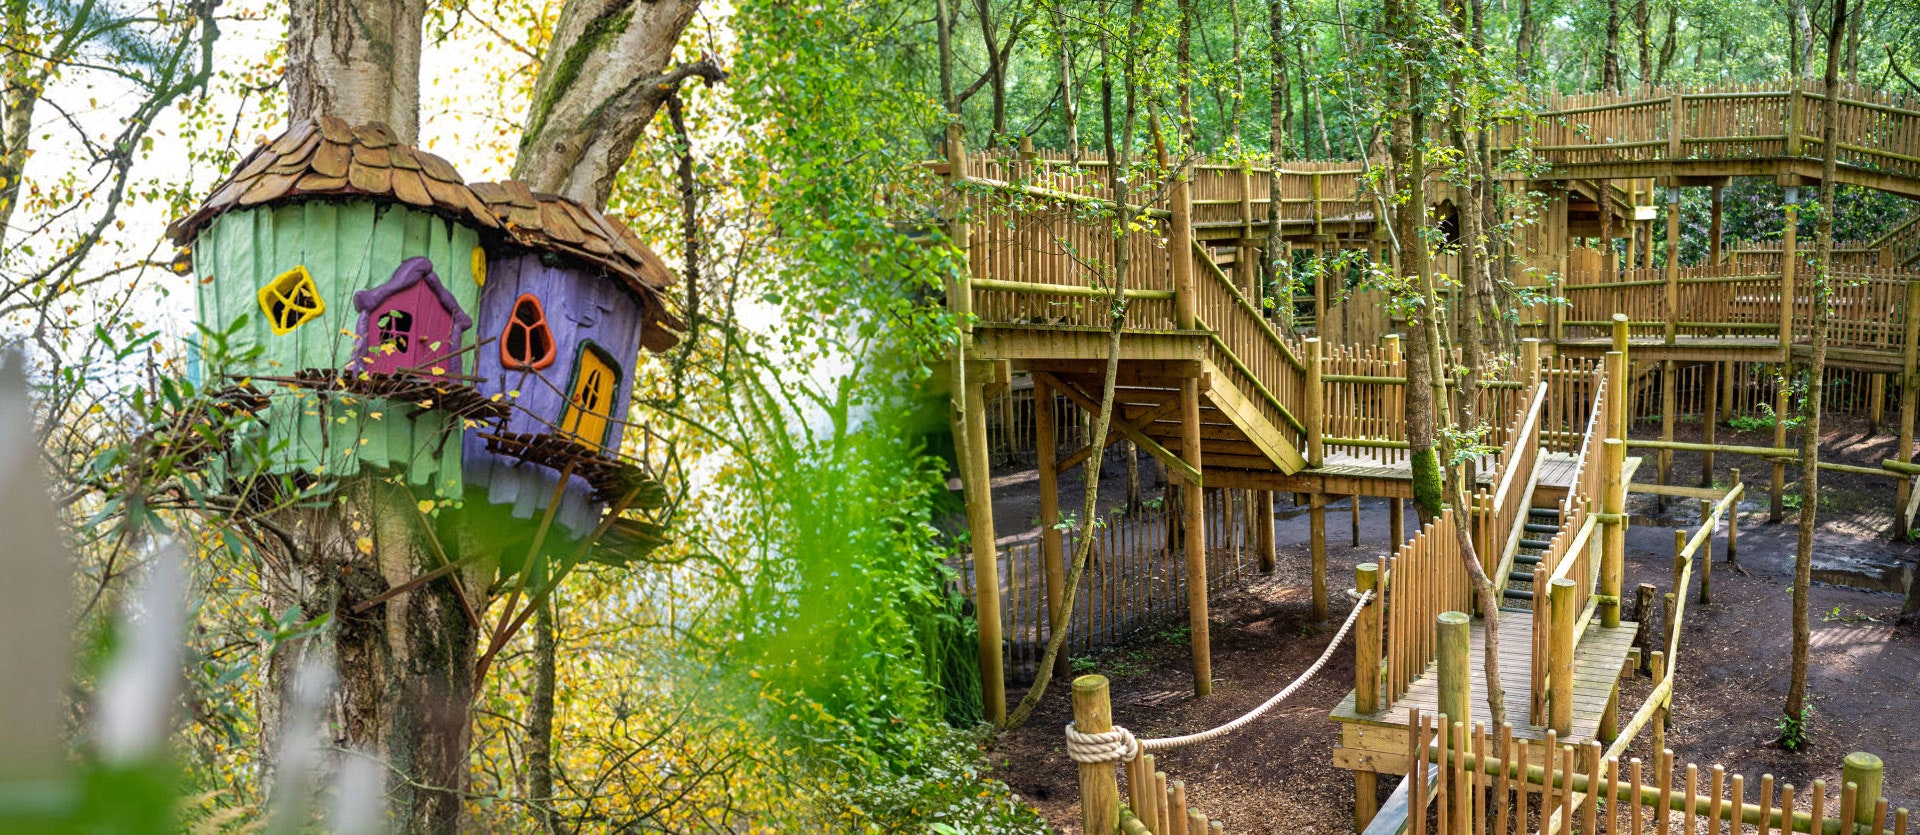 Colourful treehouses and a wooden play structure at BeWILDerwood